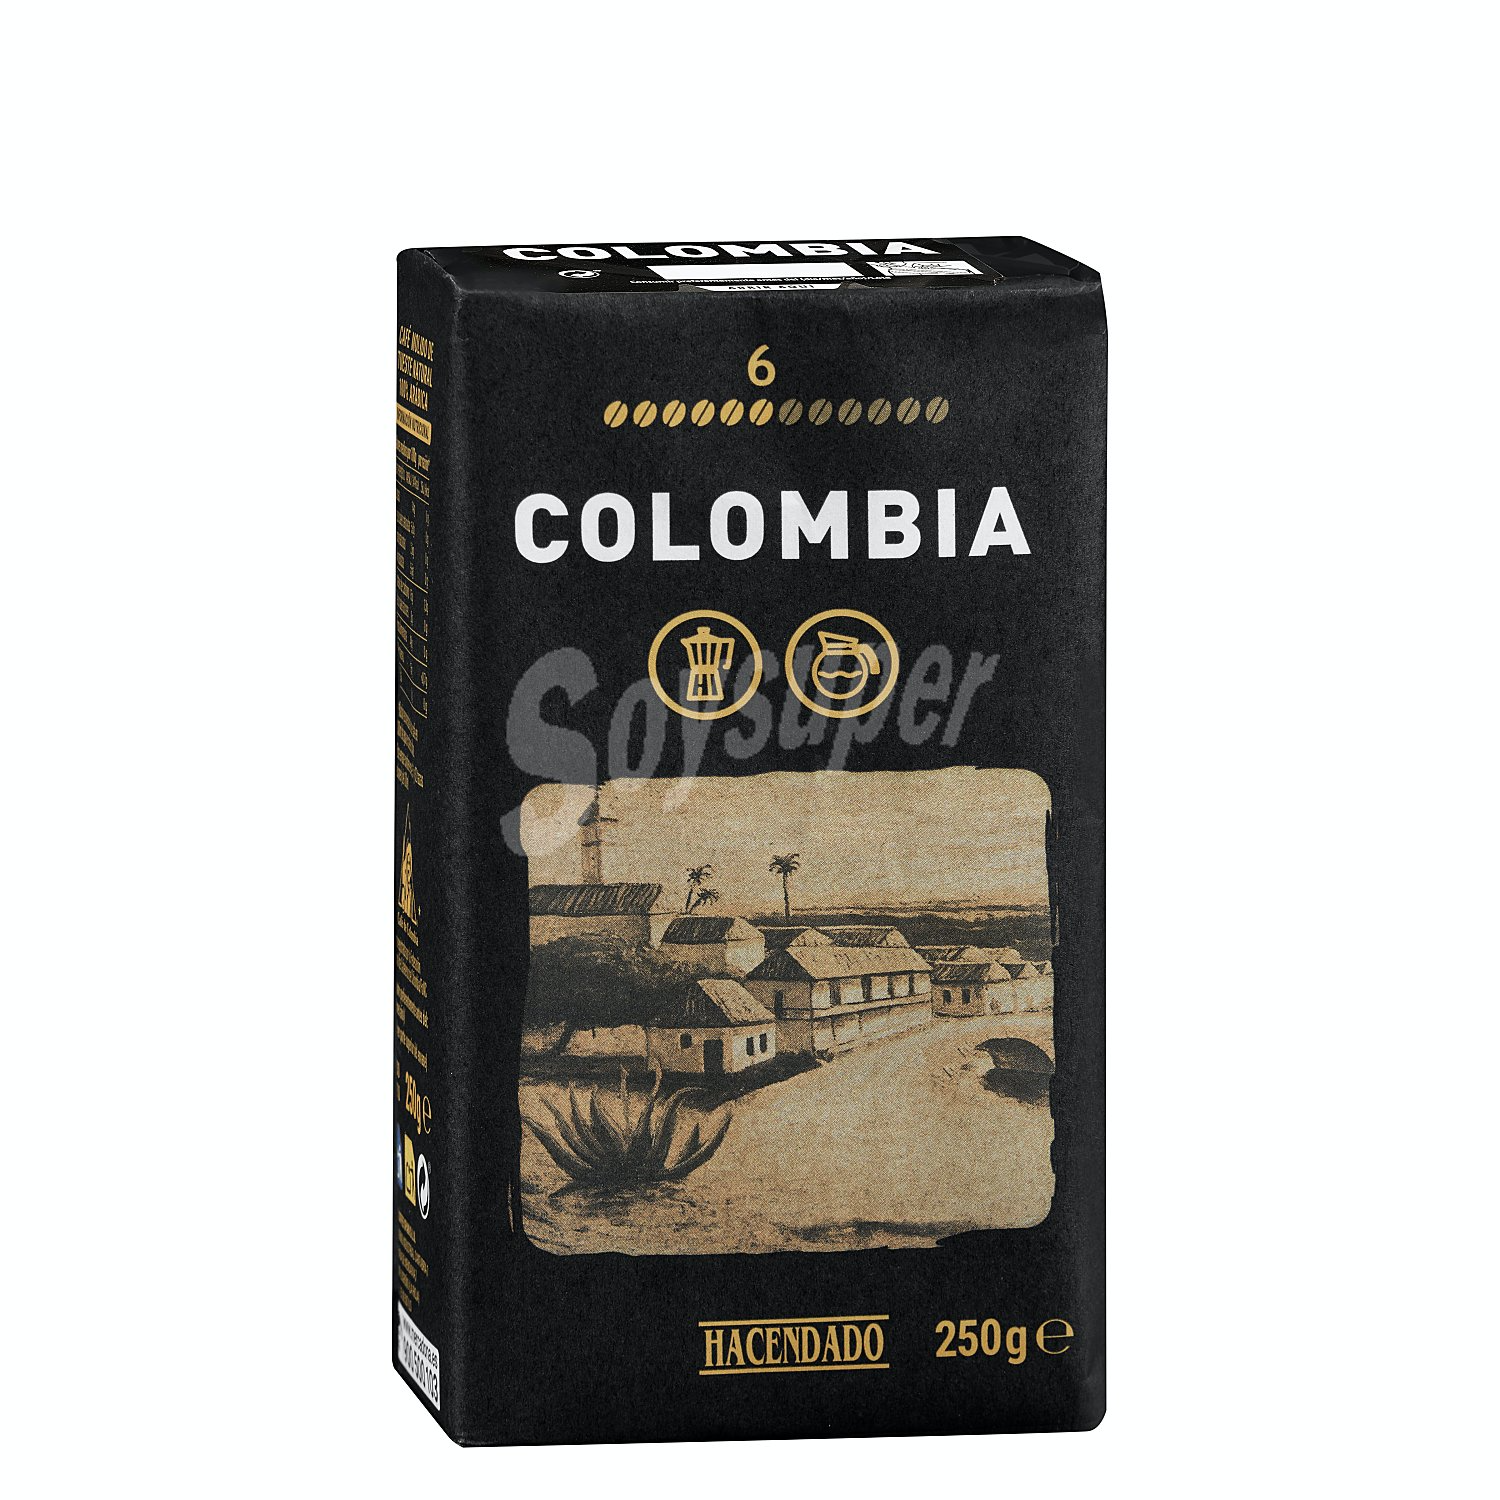 Ground Coffee BRAZIL & COLOMBIA 2x 220g Delta Portugal Cafe Total 440g -  0.97lb